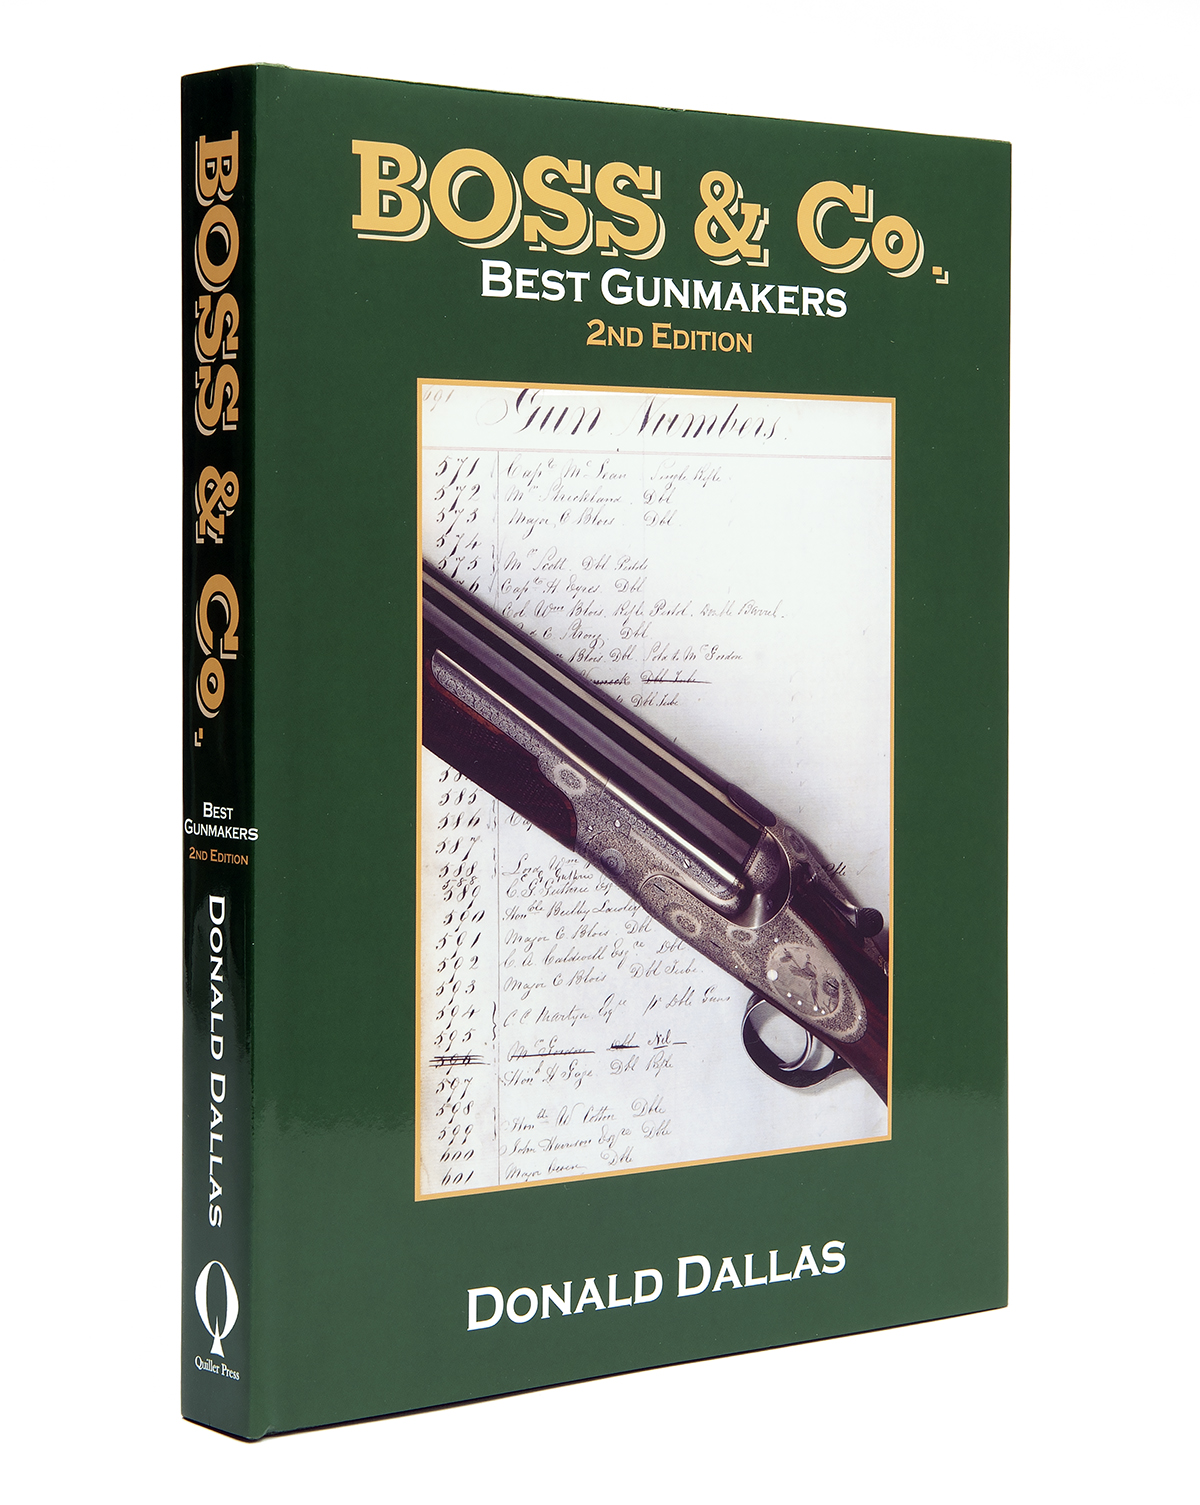 DONALD DALLAS 'BOSS & CO. - BEST GUNMAKERS 2nd Edition', published by Quiller 2005, 352 pages, bound